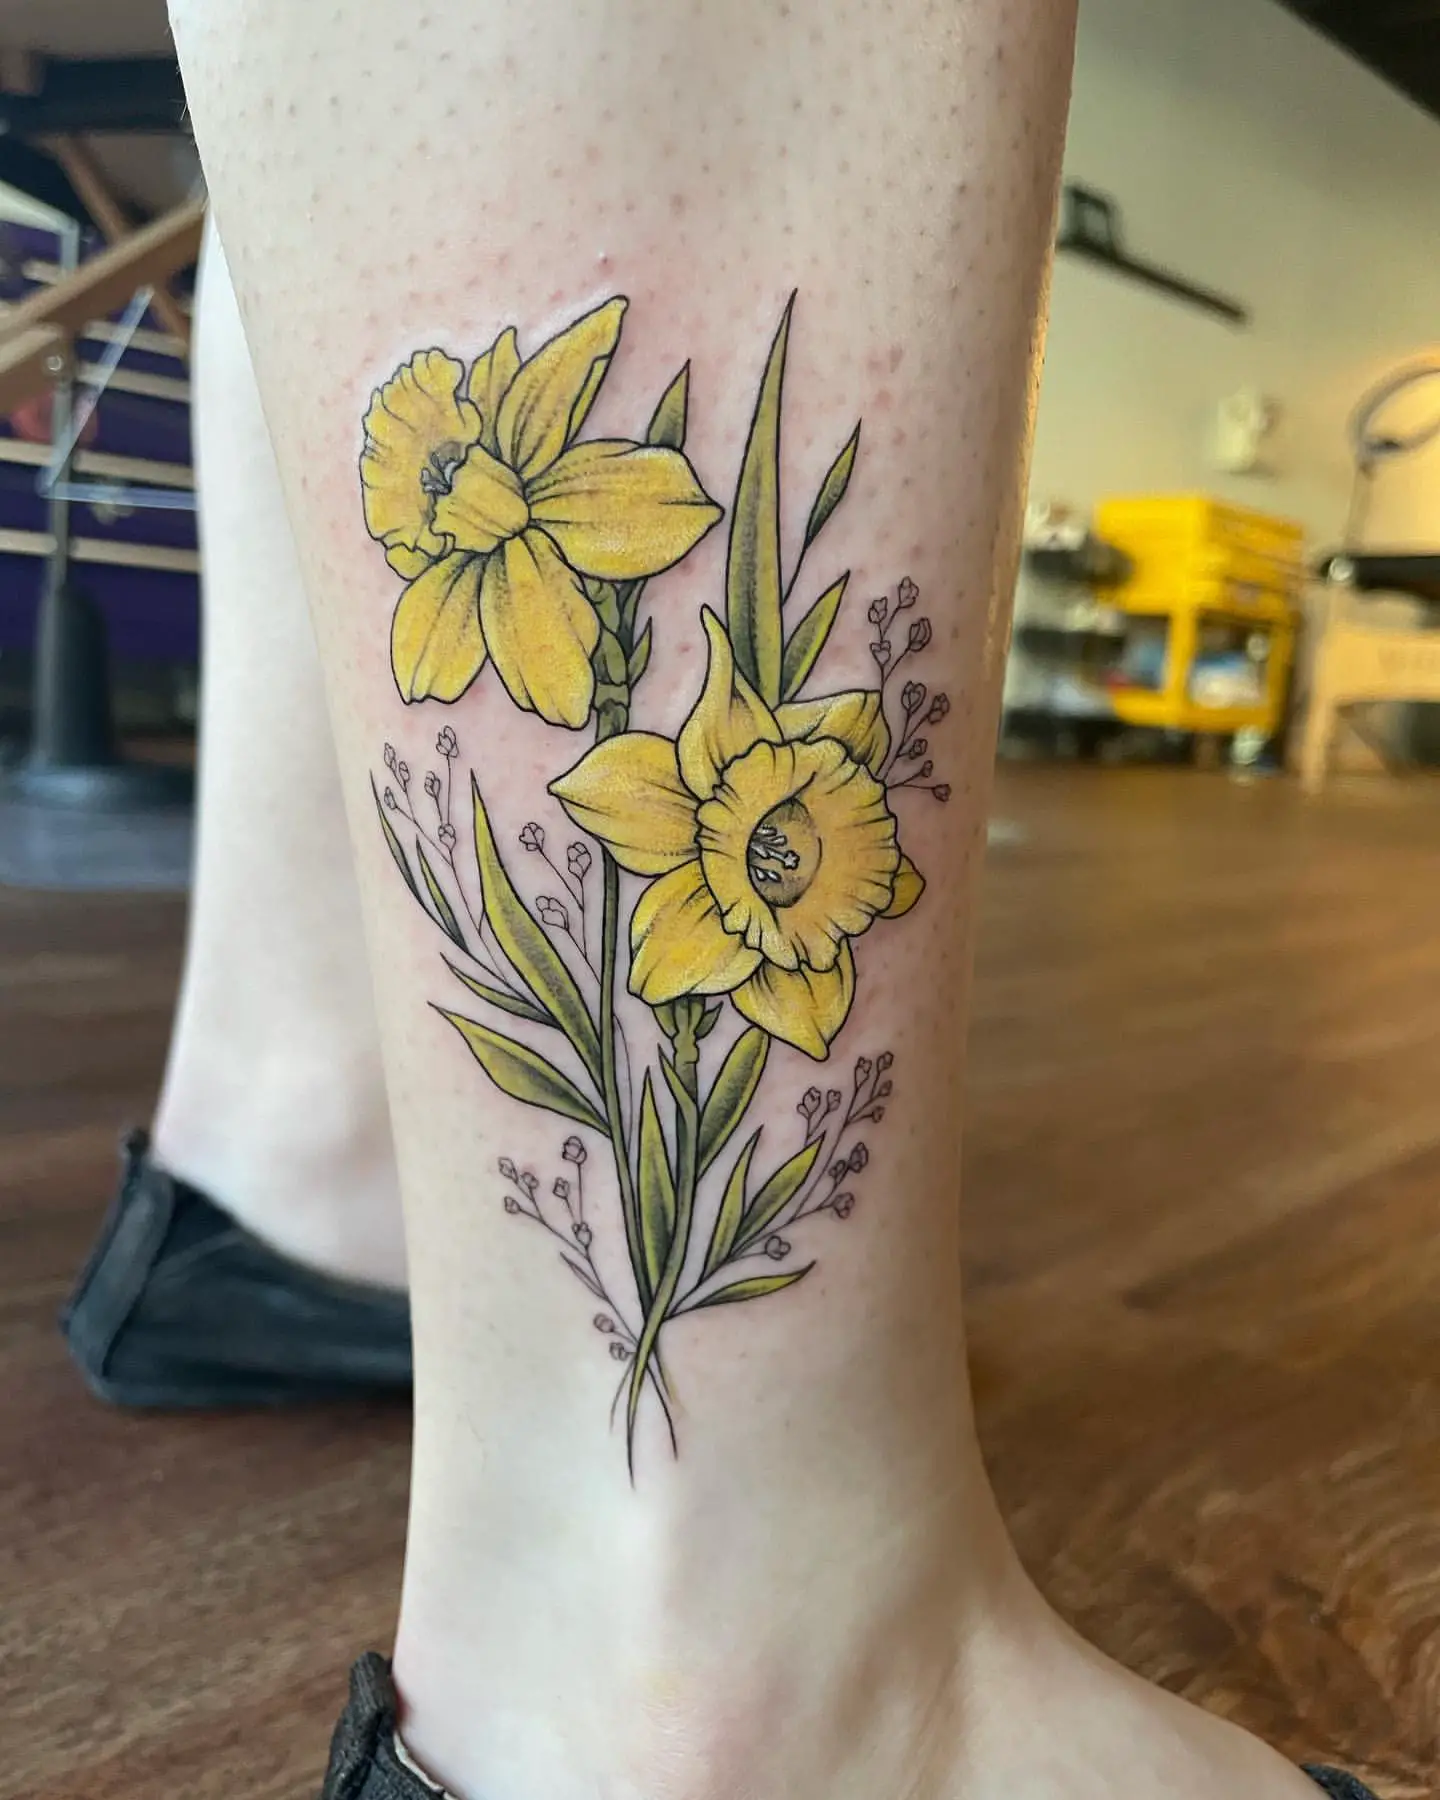 Daffodil Meaning Tattoo: Symbolism and Significance Explained